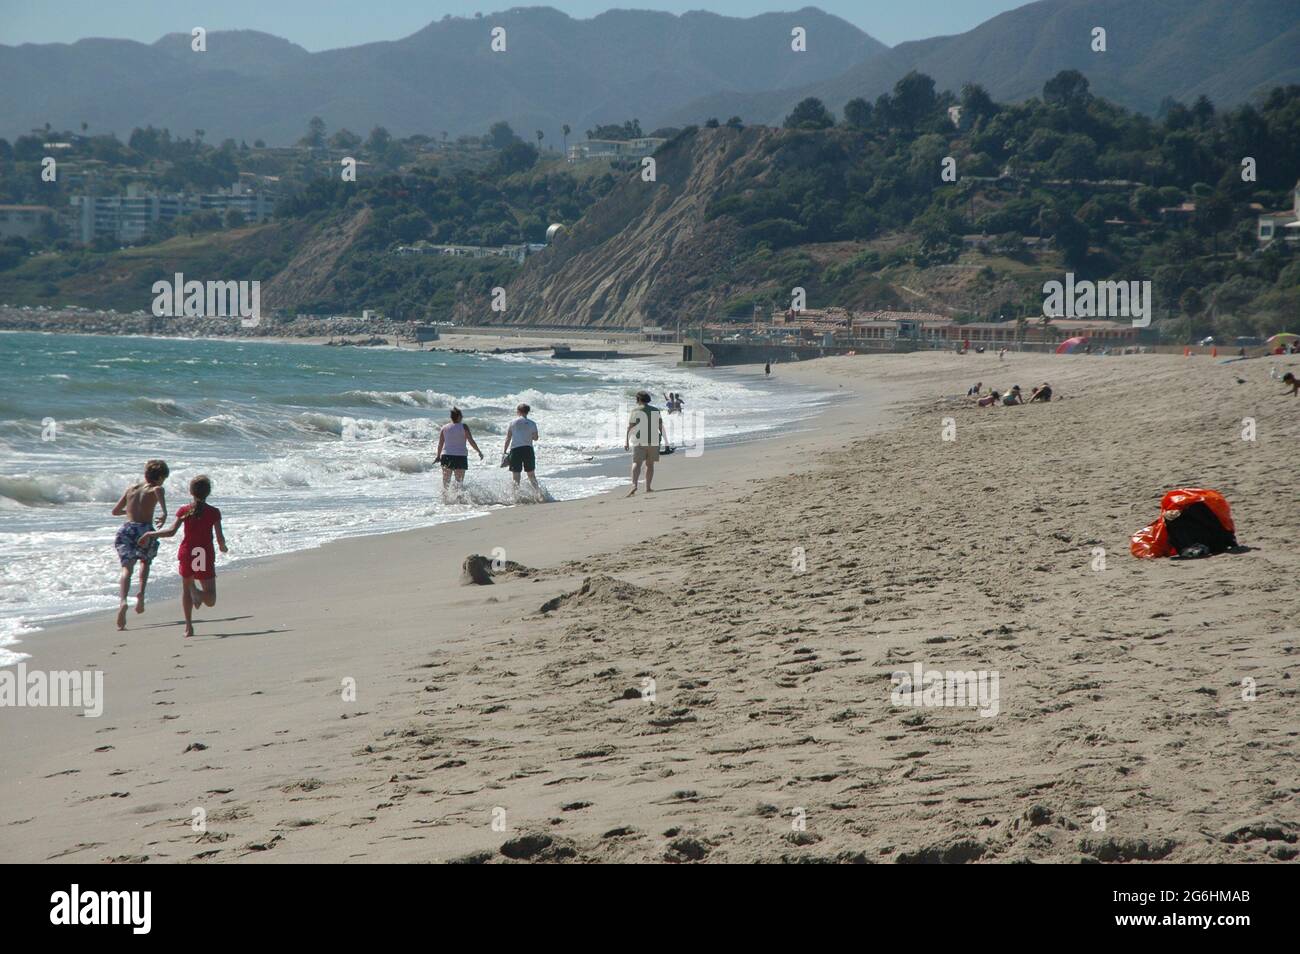 People enjoying clear day at Will Rogers Beach State Park near Santa ...